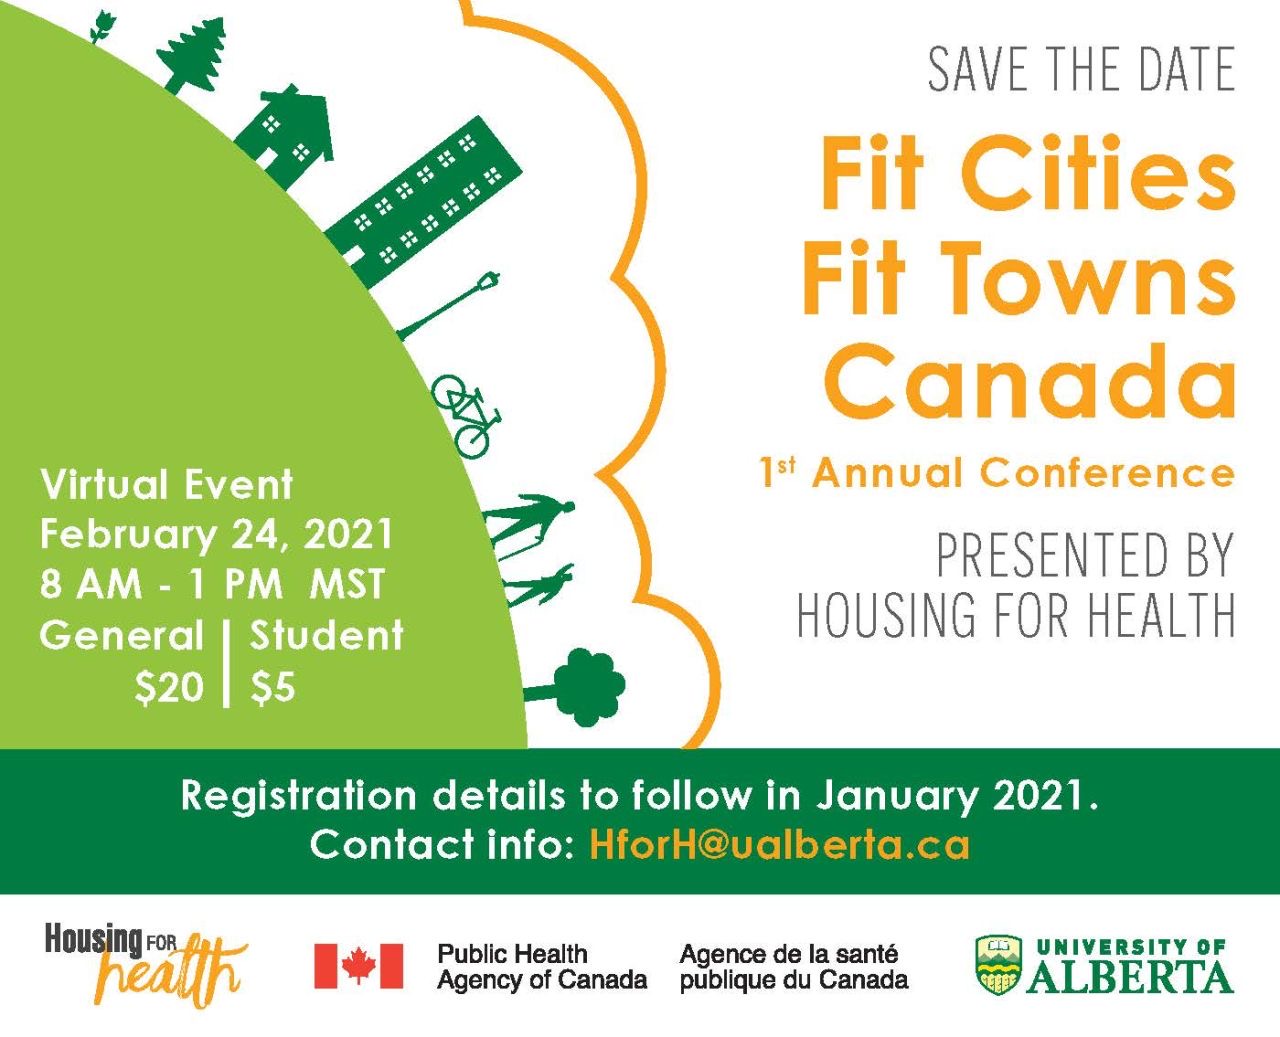 Save the date. Fit Cities Fit Towns Canada 1st Annual Confrence Presented By Housing for Health. Virtual Event Febuary 24, 2021. 8 am - 1 PM MST General $20, Student $5